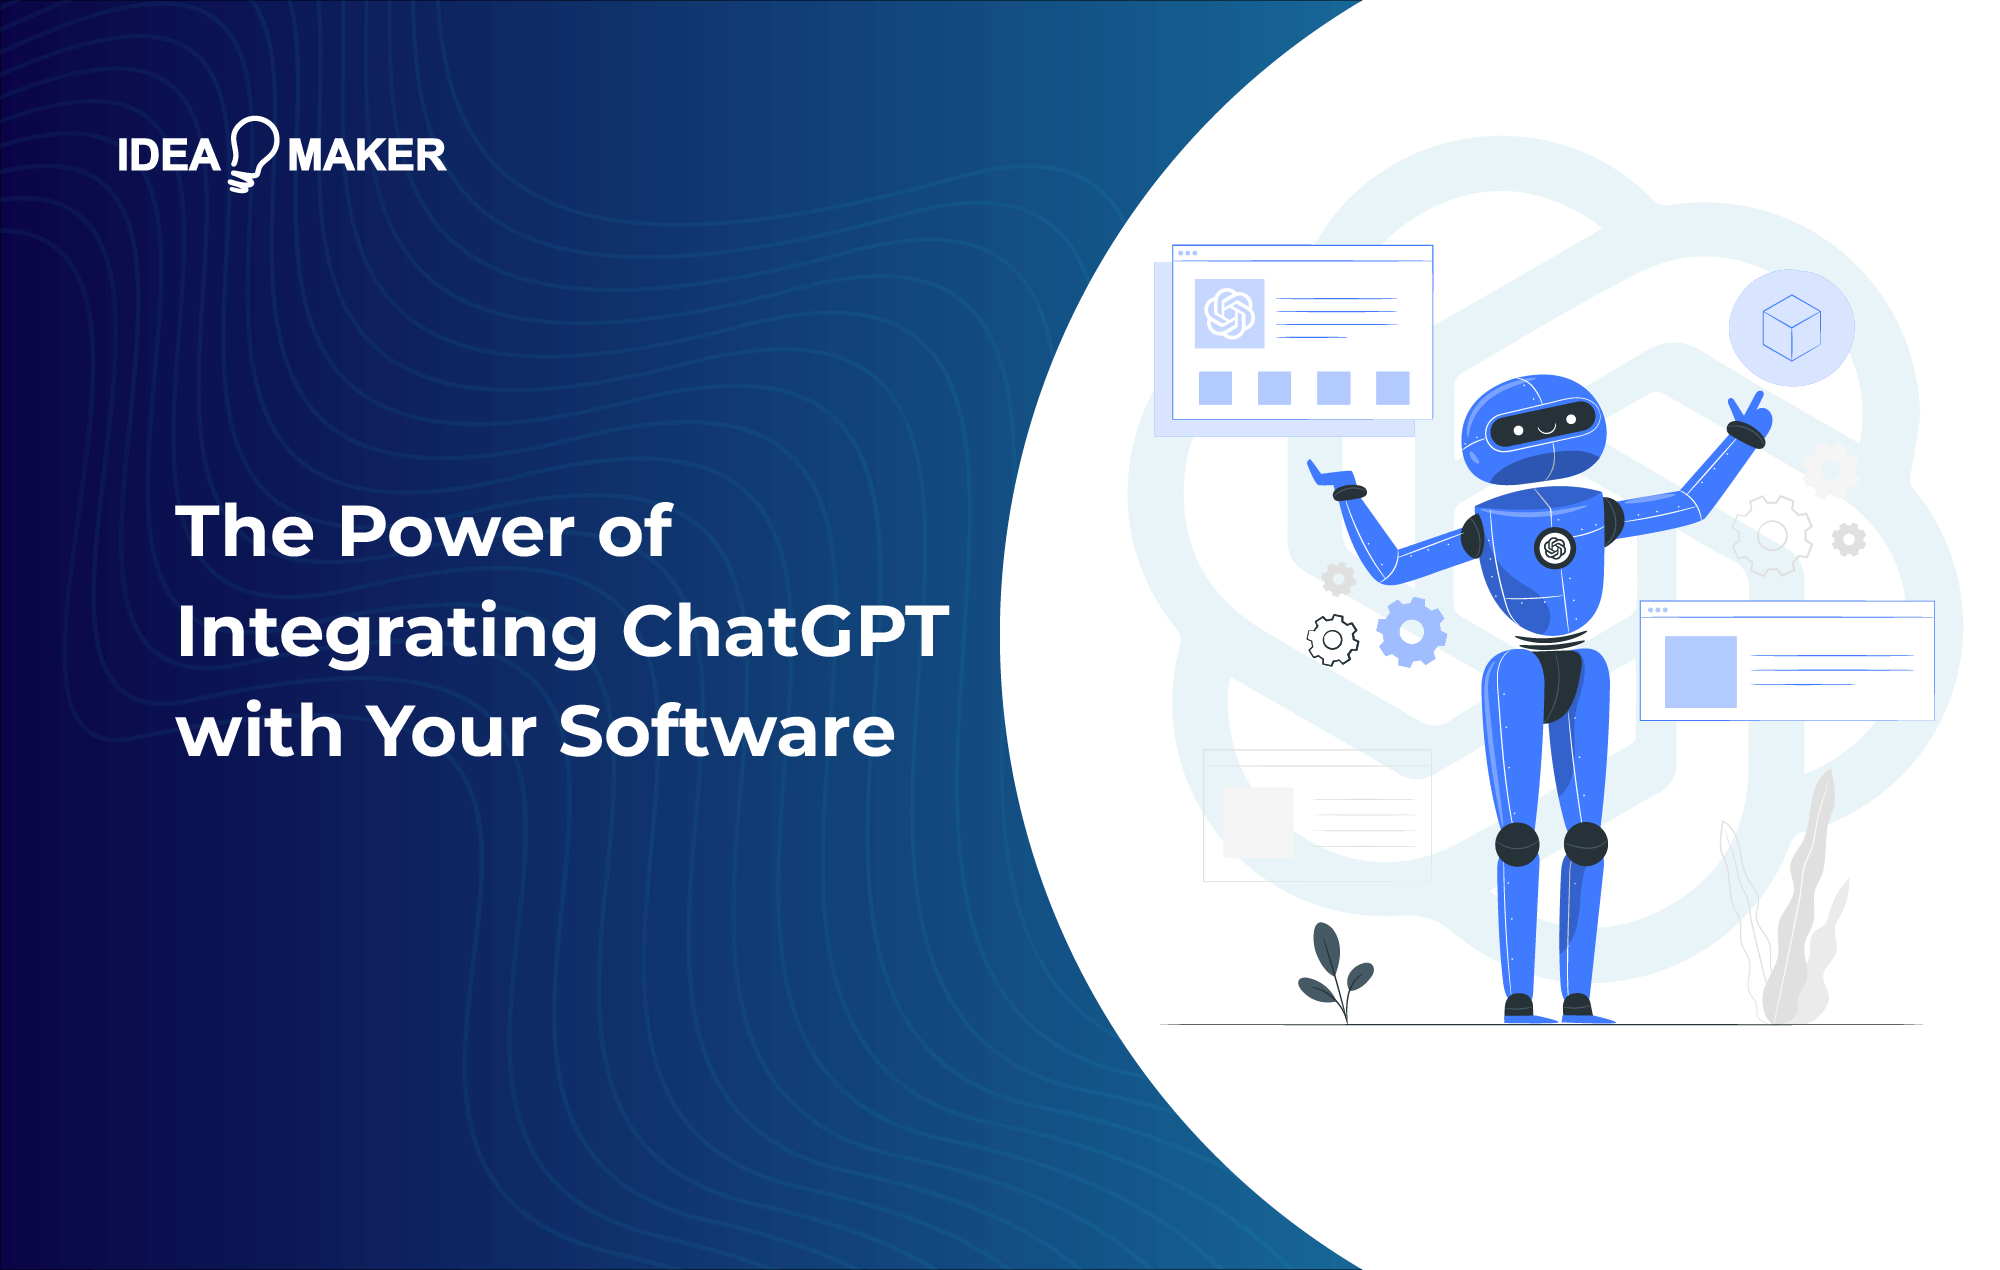 ChatGPT with your software